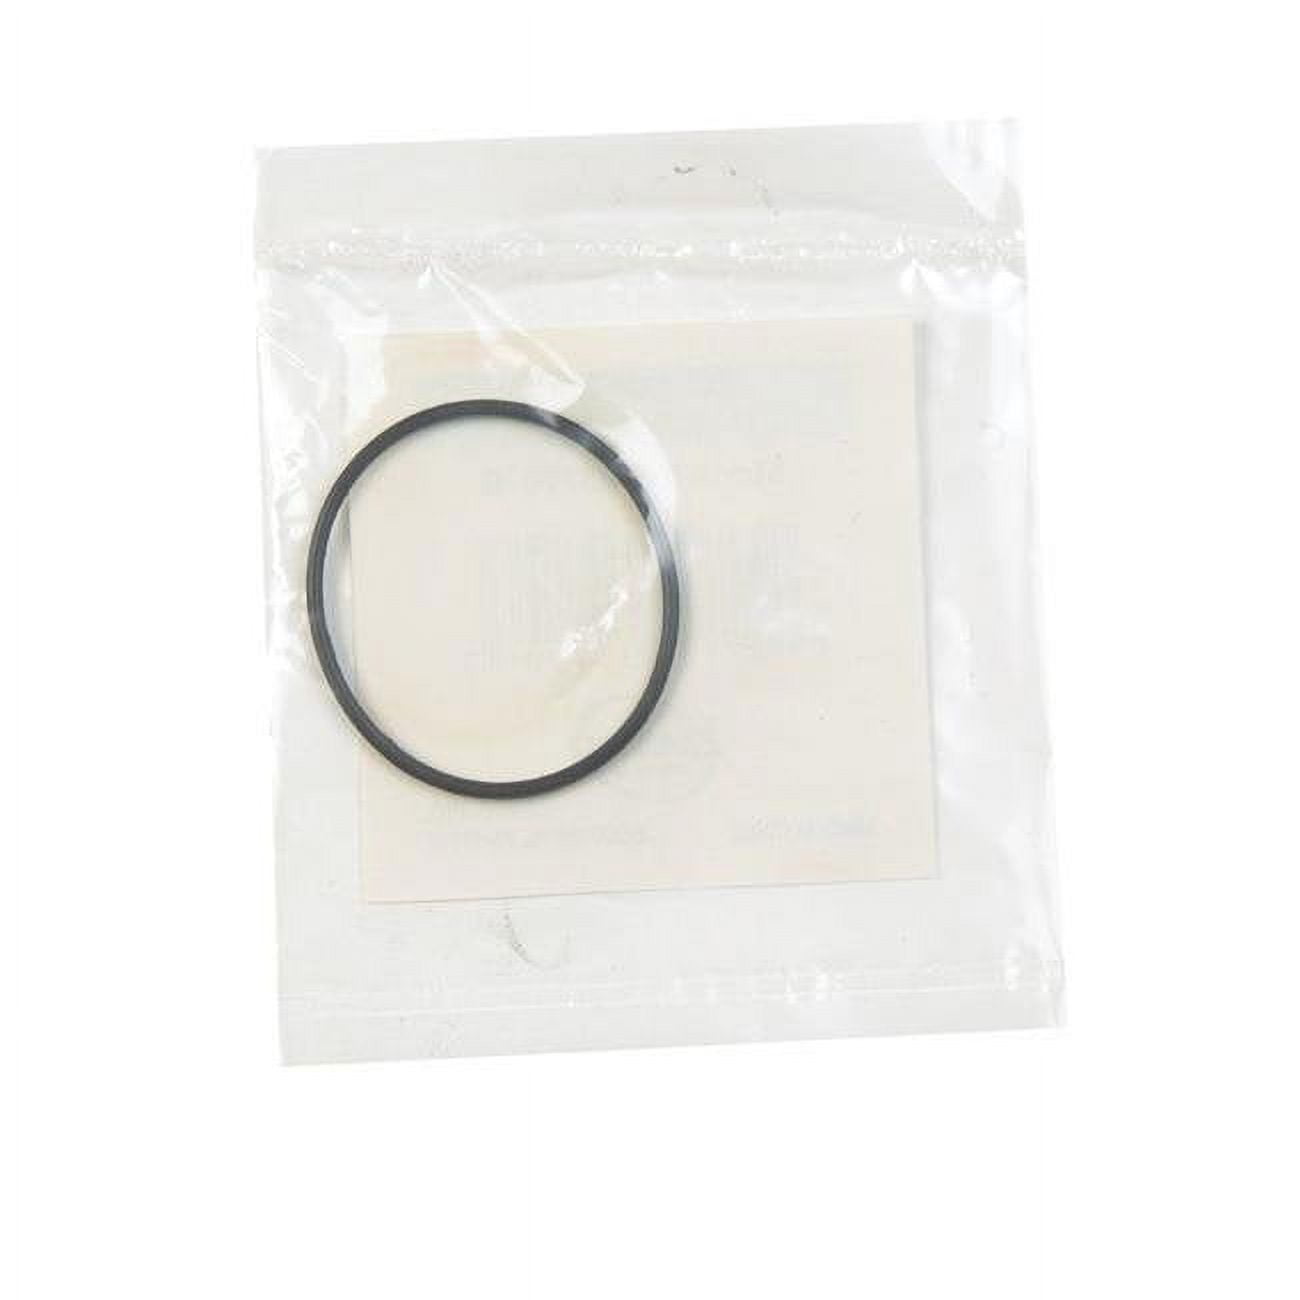 35770b 1.5 X 1.37 X 0.06 In. O Ring- Pack Of 5